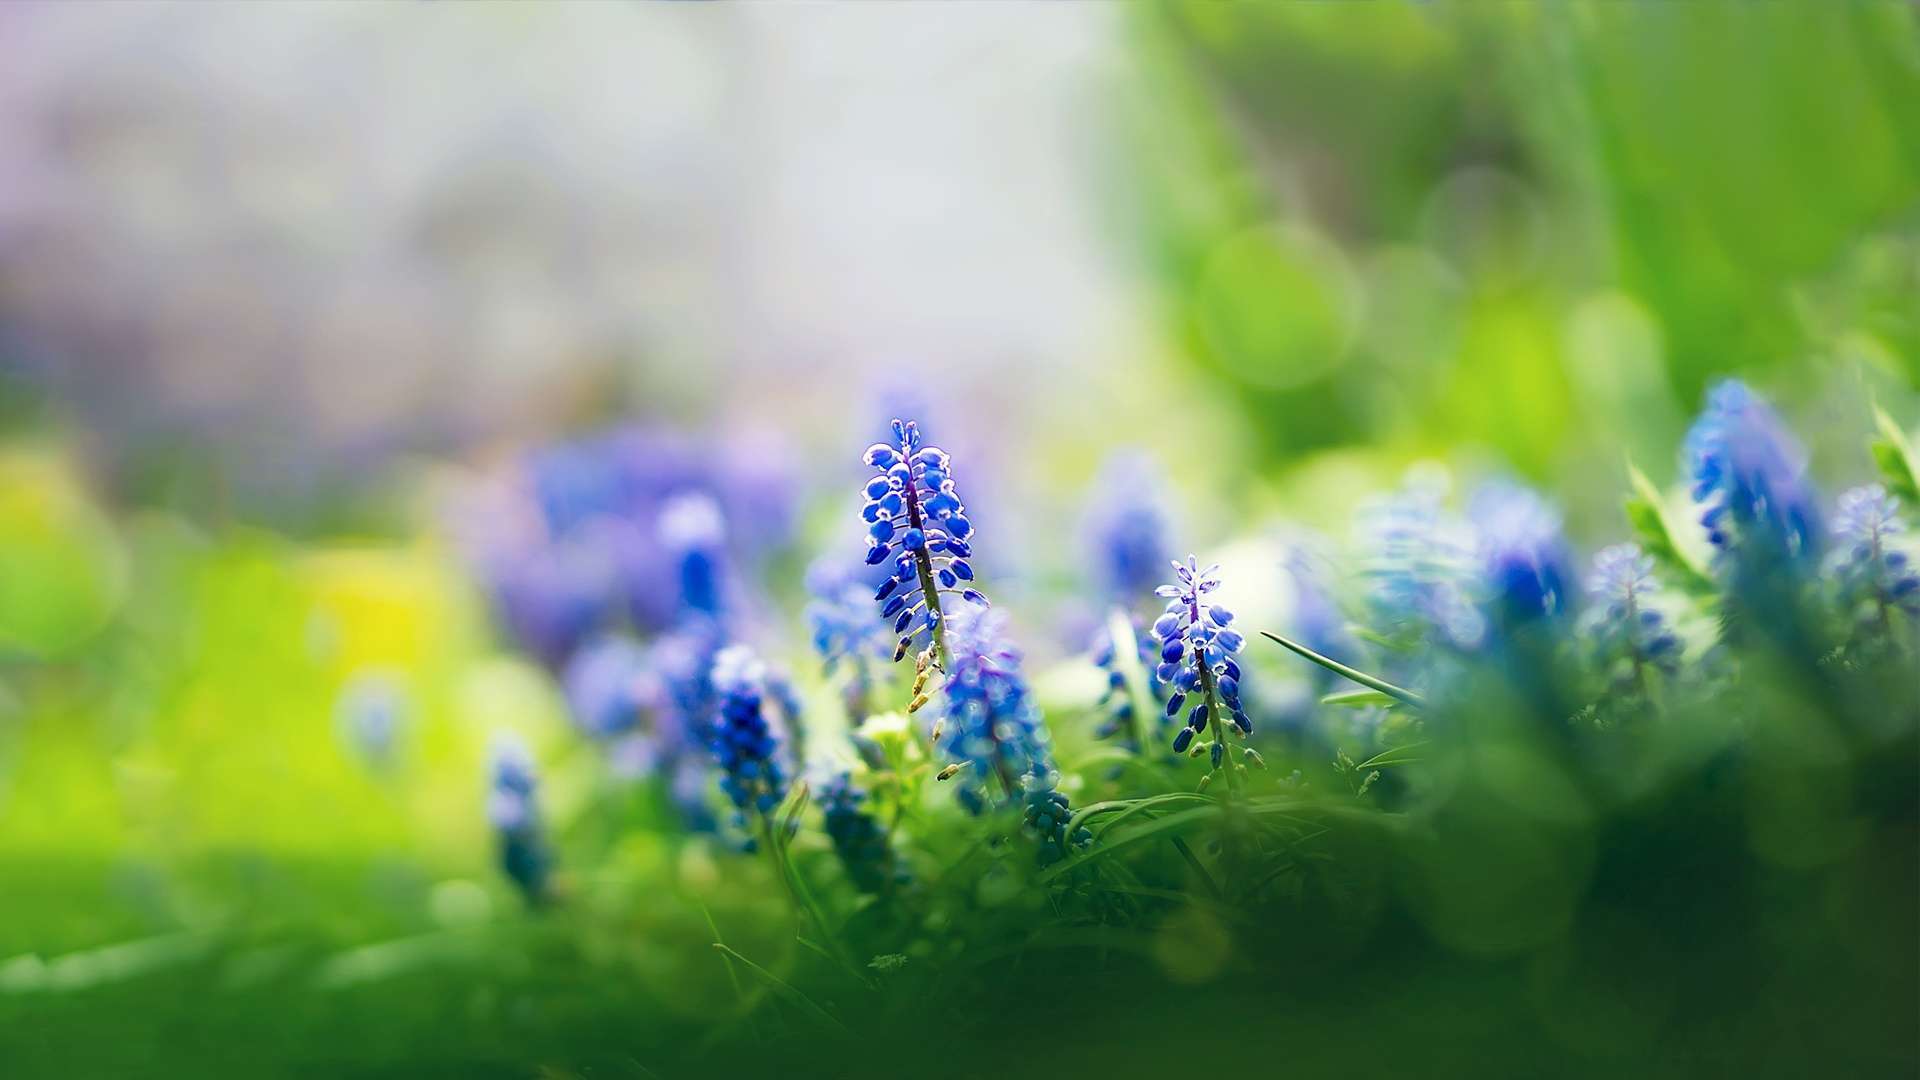 Wallpaper Muscari Flowers HD 1080p Upload At March